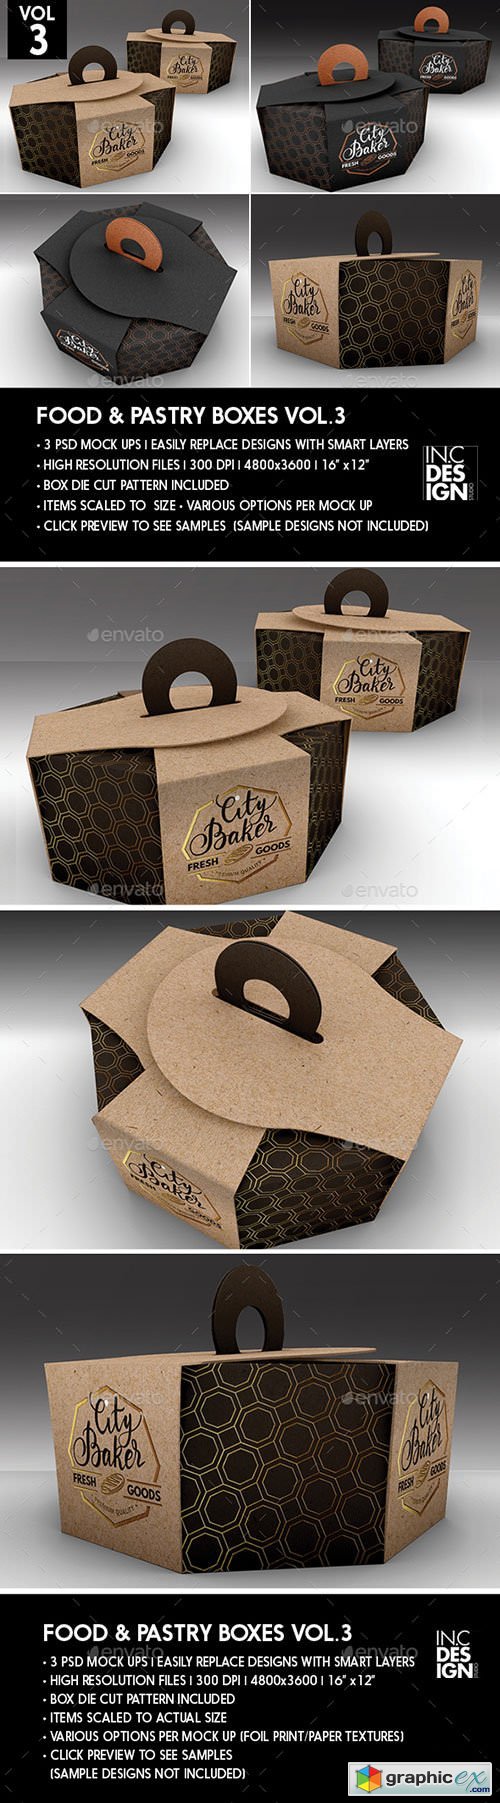 Packaging Mock Up Octagon Cake or Pastry Take Out Boxes VOL.3